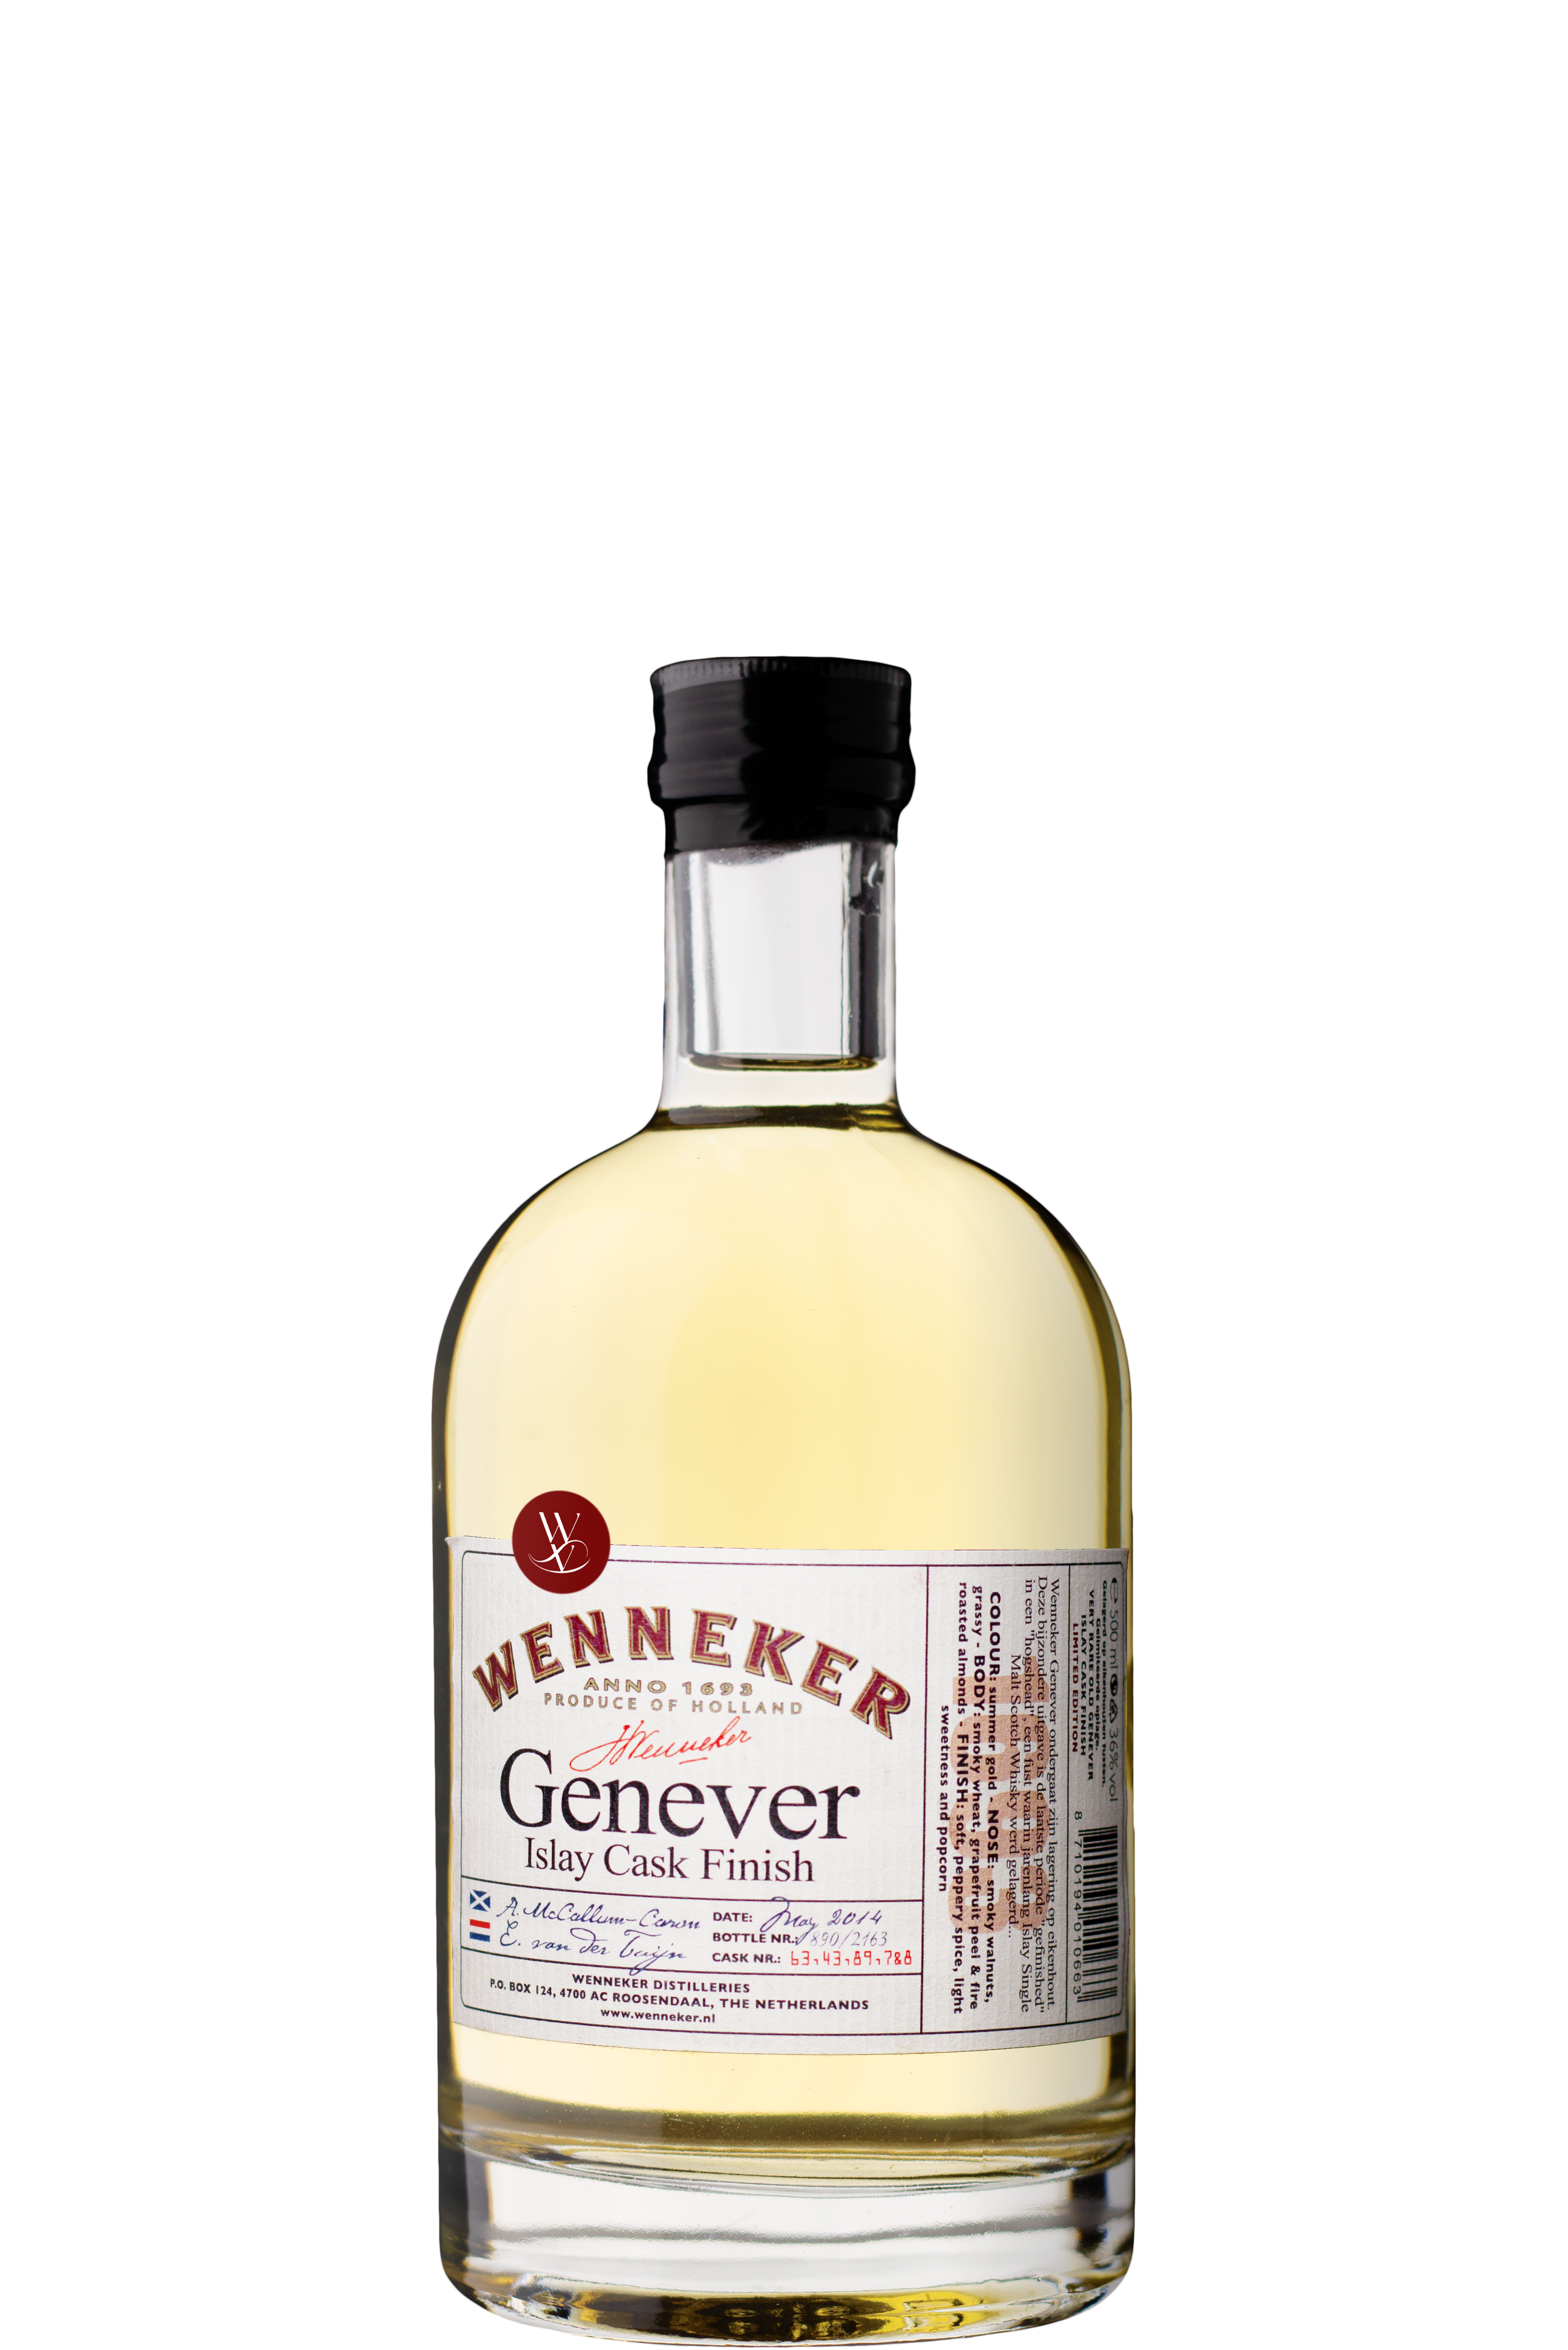 WineVins Wenneker Old Islay Cask Finish